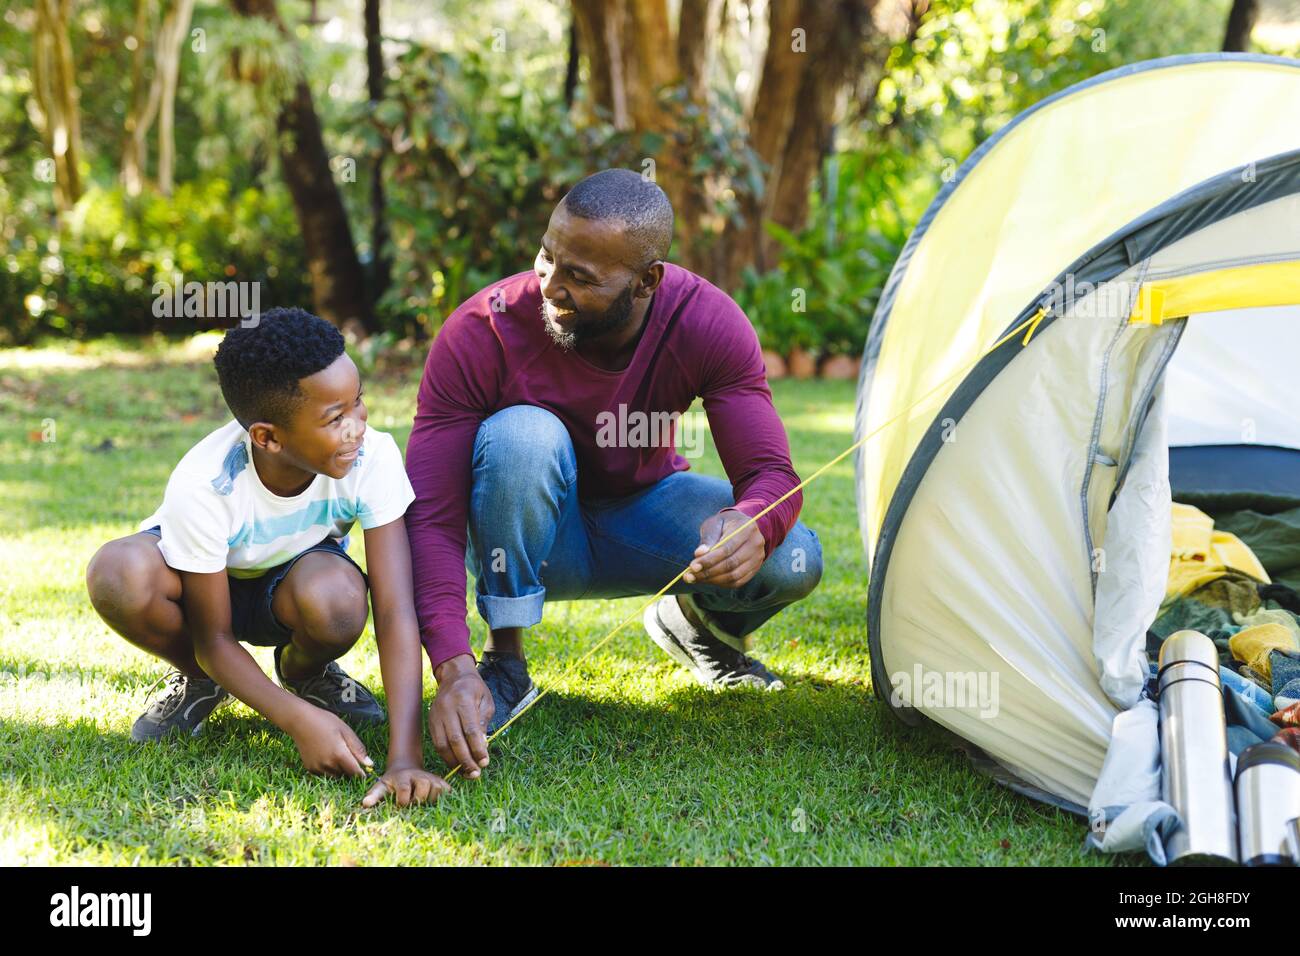 African american father with son having fun pitching tent in garden Stock Photo